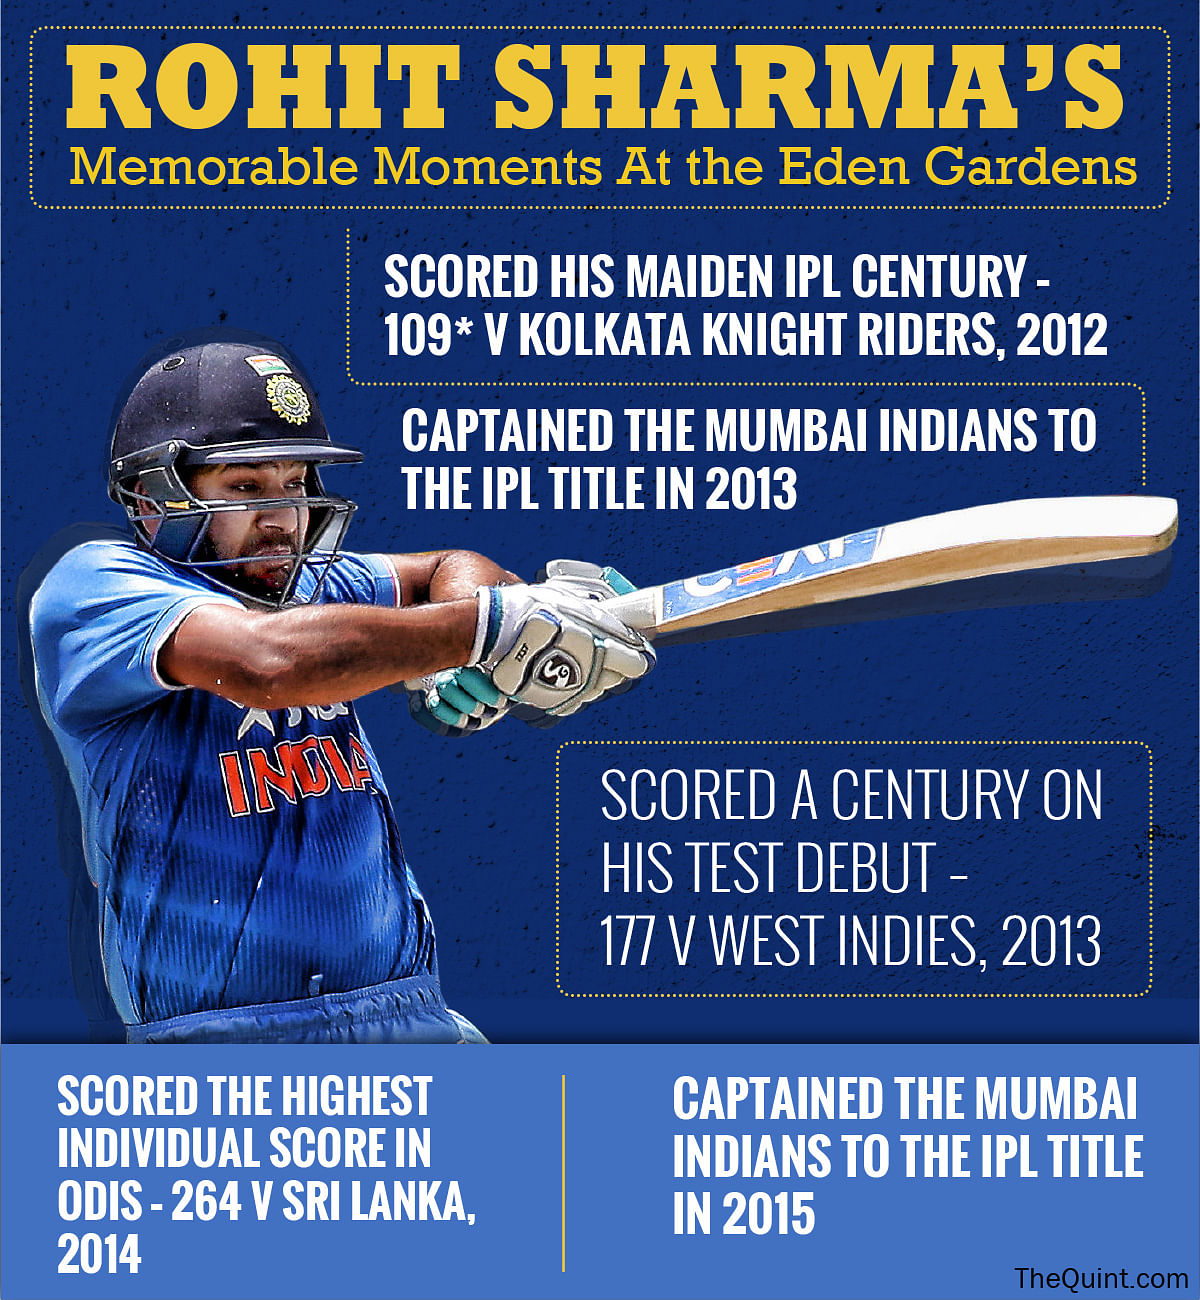 Rohit Sharma shares a special bond with the Eden Gardens and this piece explores his love for the venue.